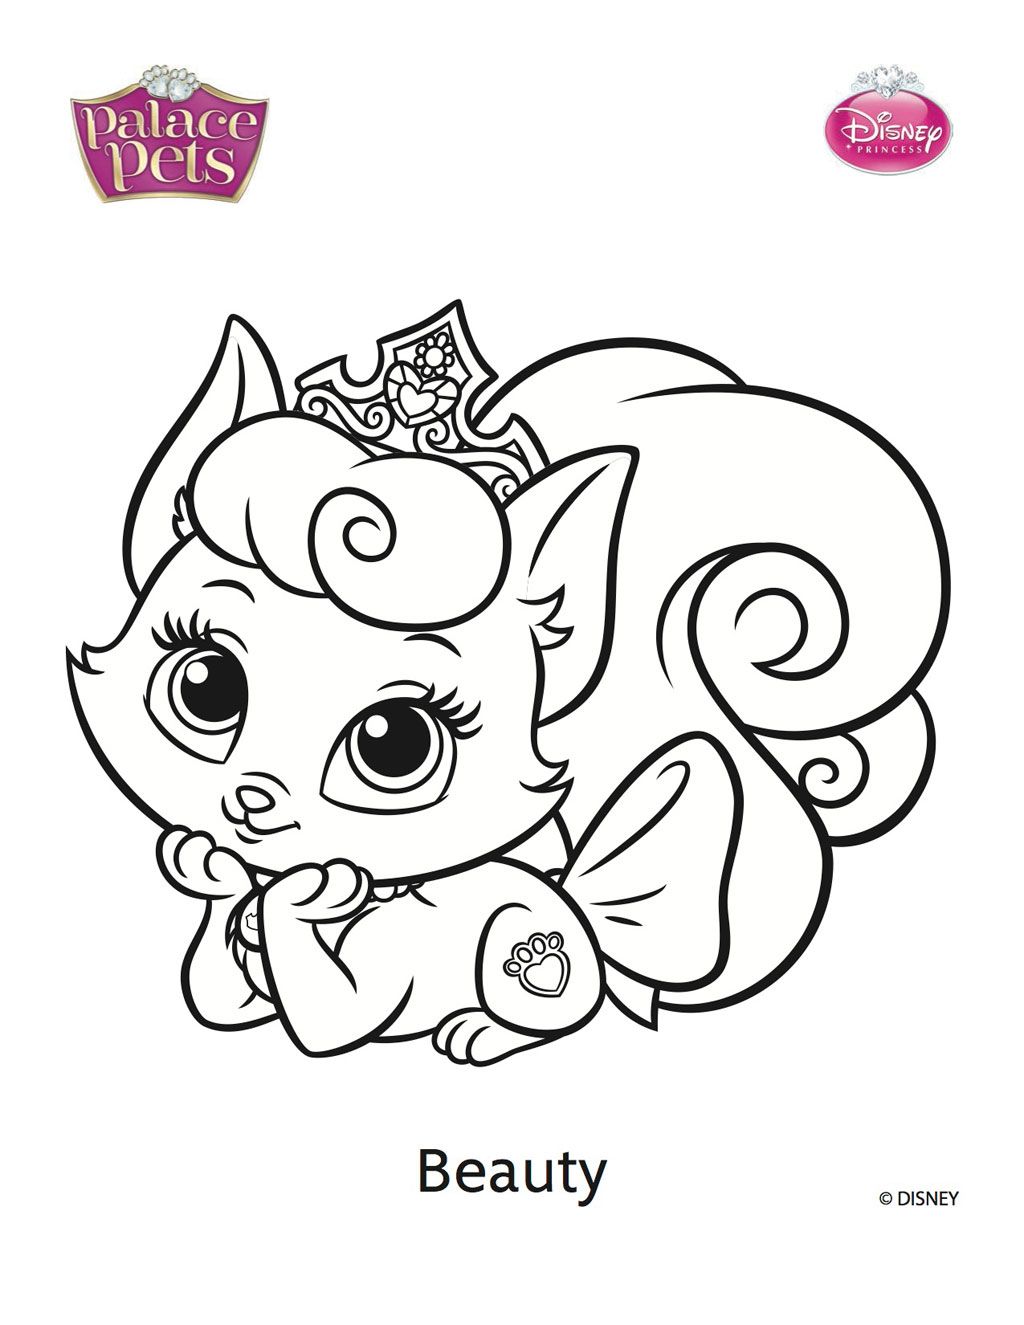 Palace pets, Printable coloring pages and Coloring pages